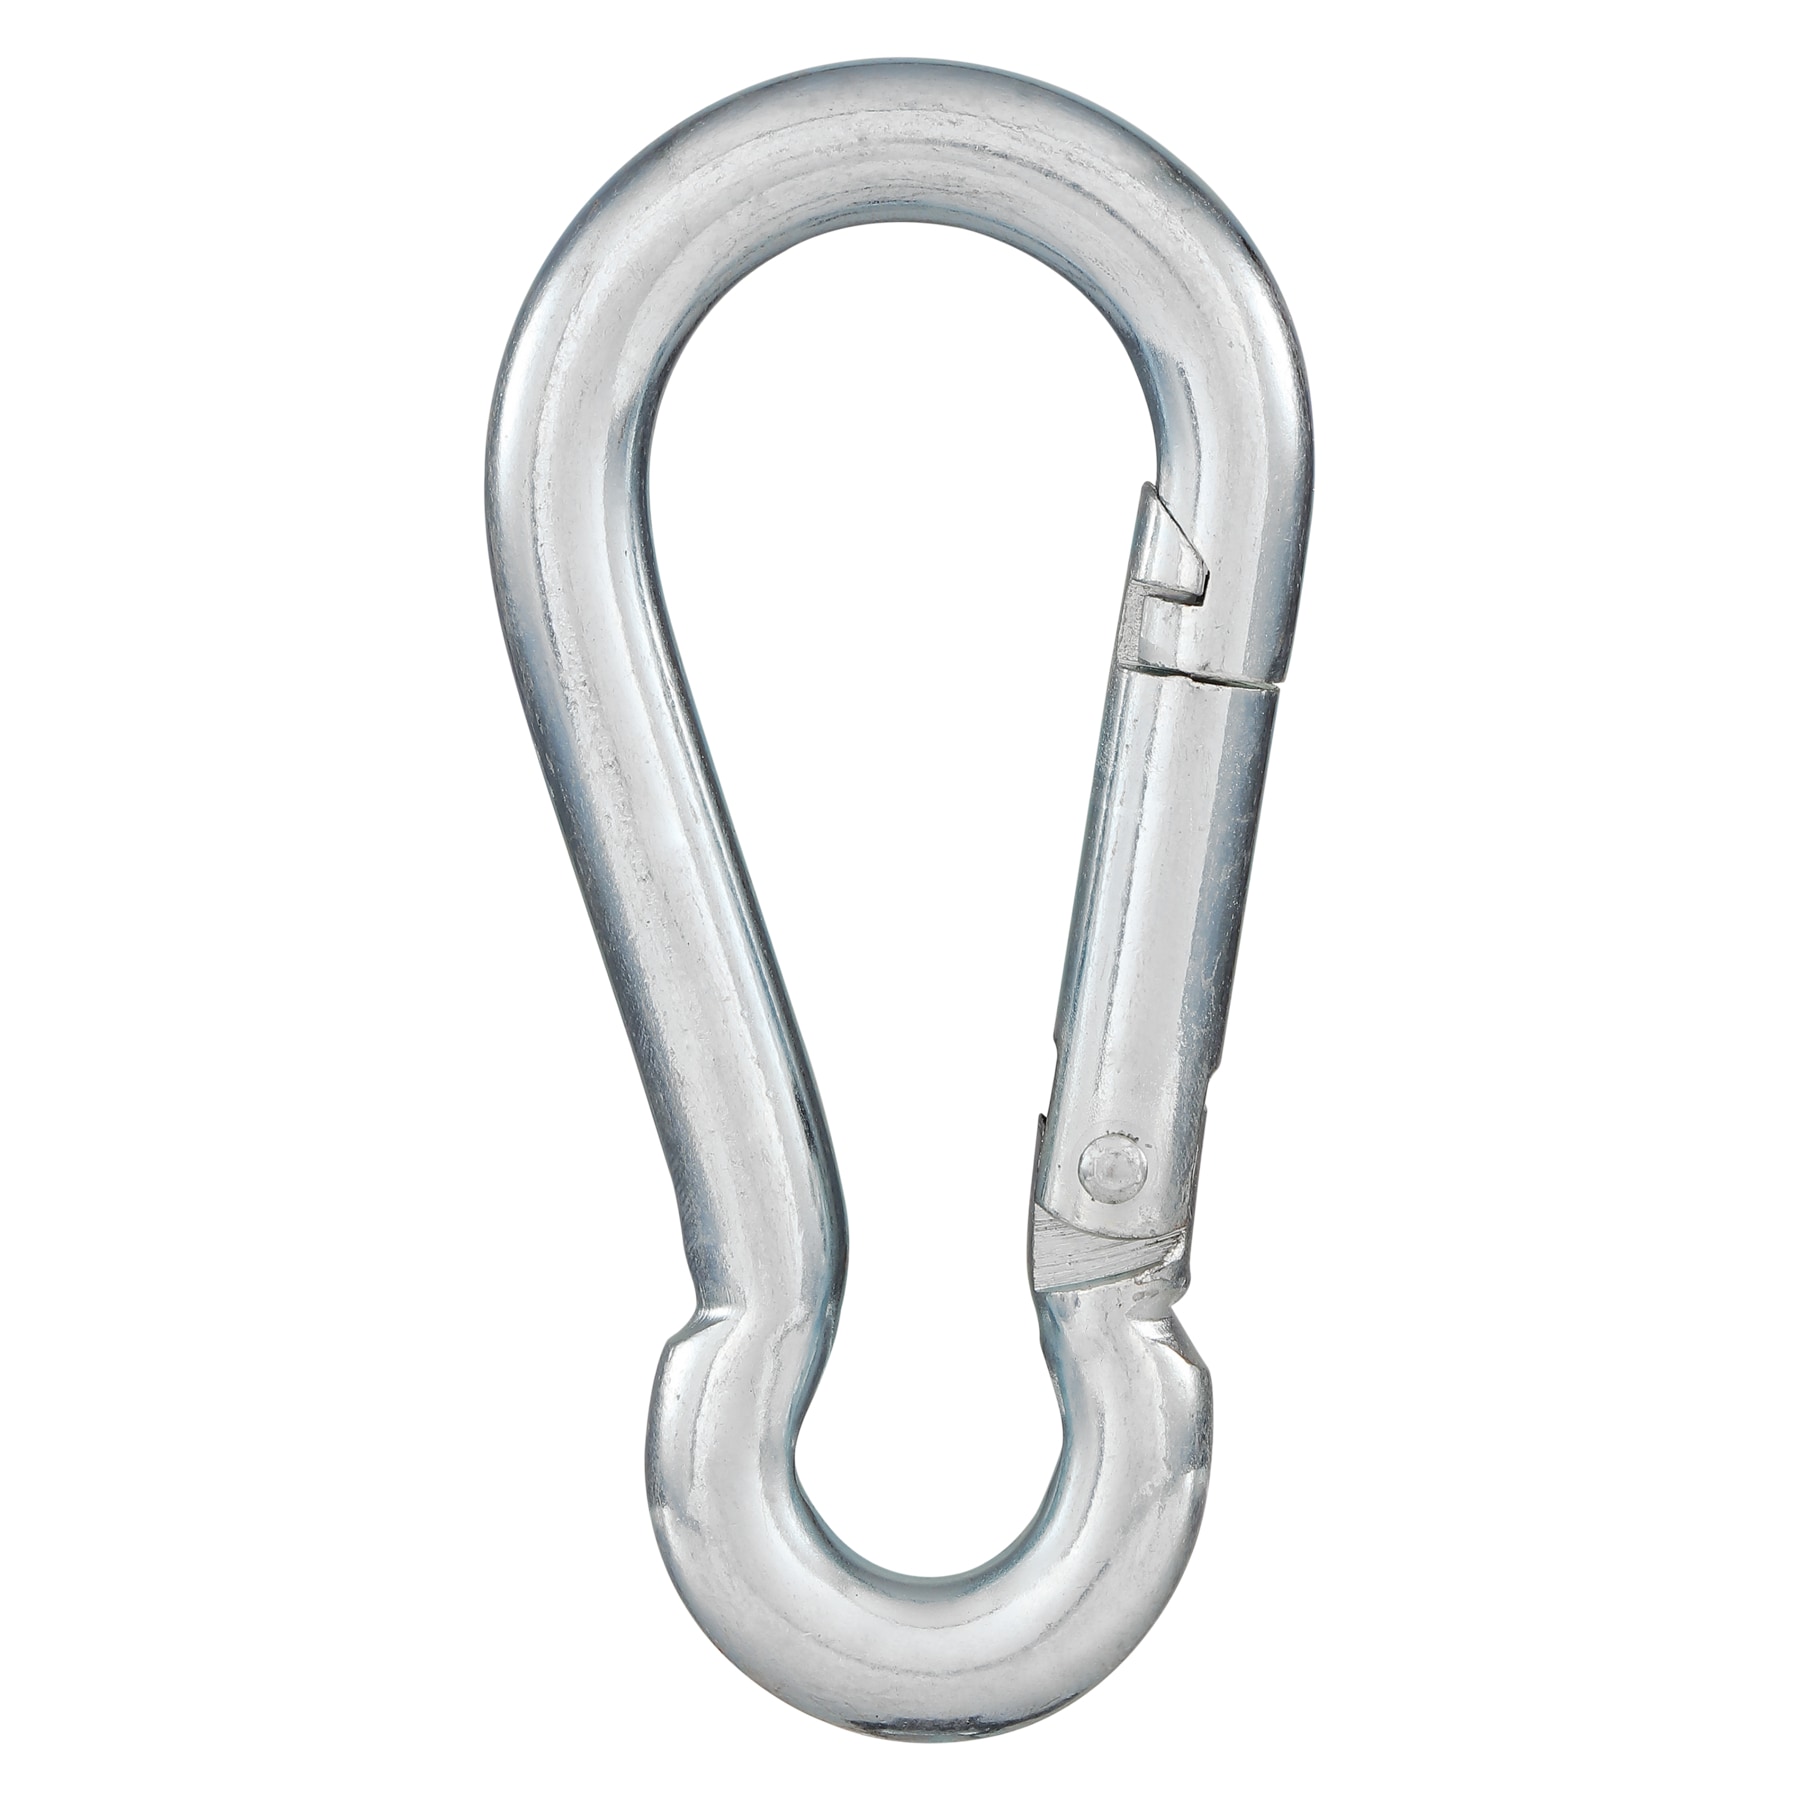 1.5'' Double Gated Carabiner S-Hook/Spring Snap: Prosperity Tool, Inc.